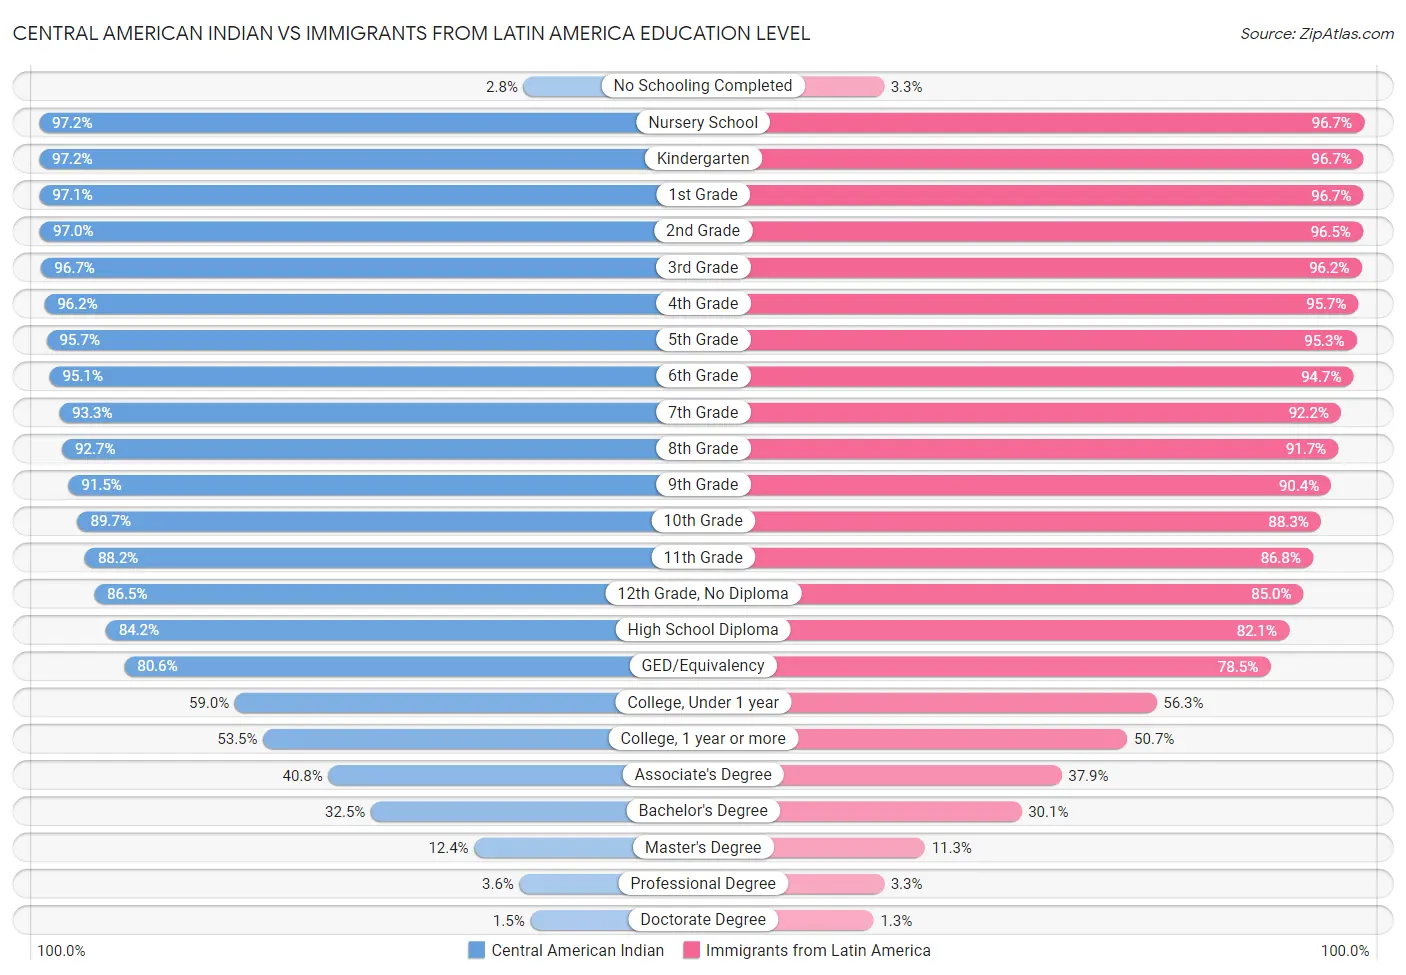 Central American Indian vs Immigrants from Latin America Education Level